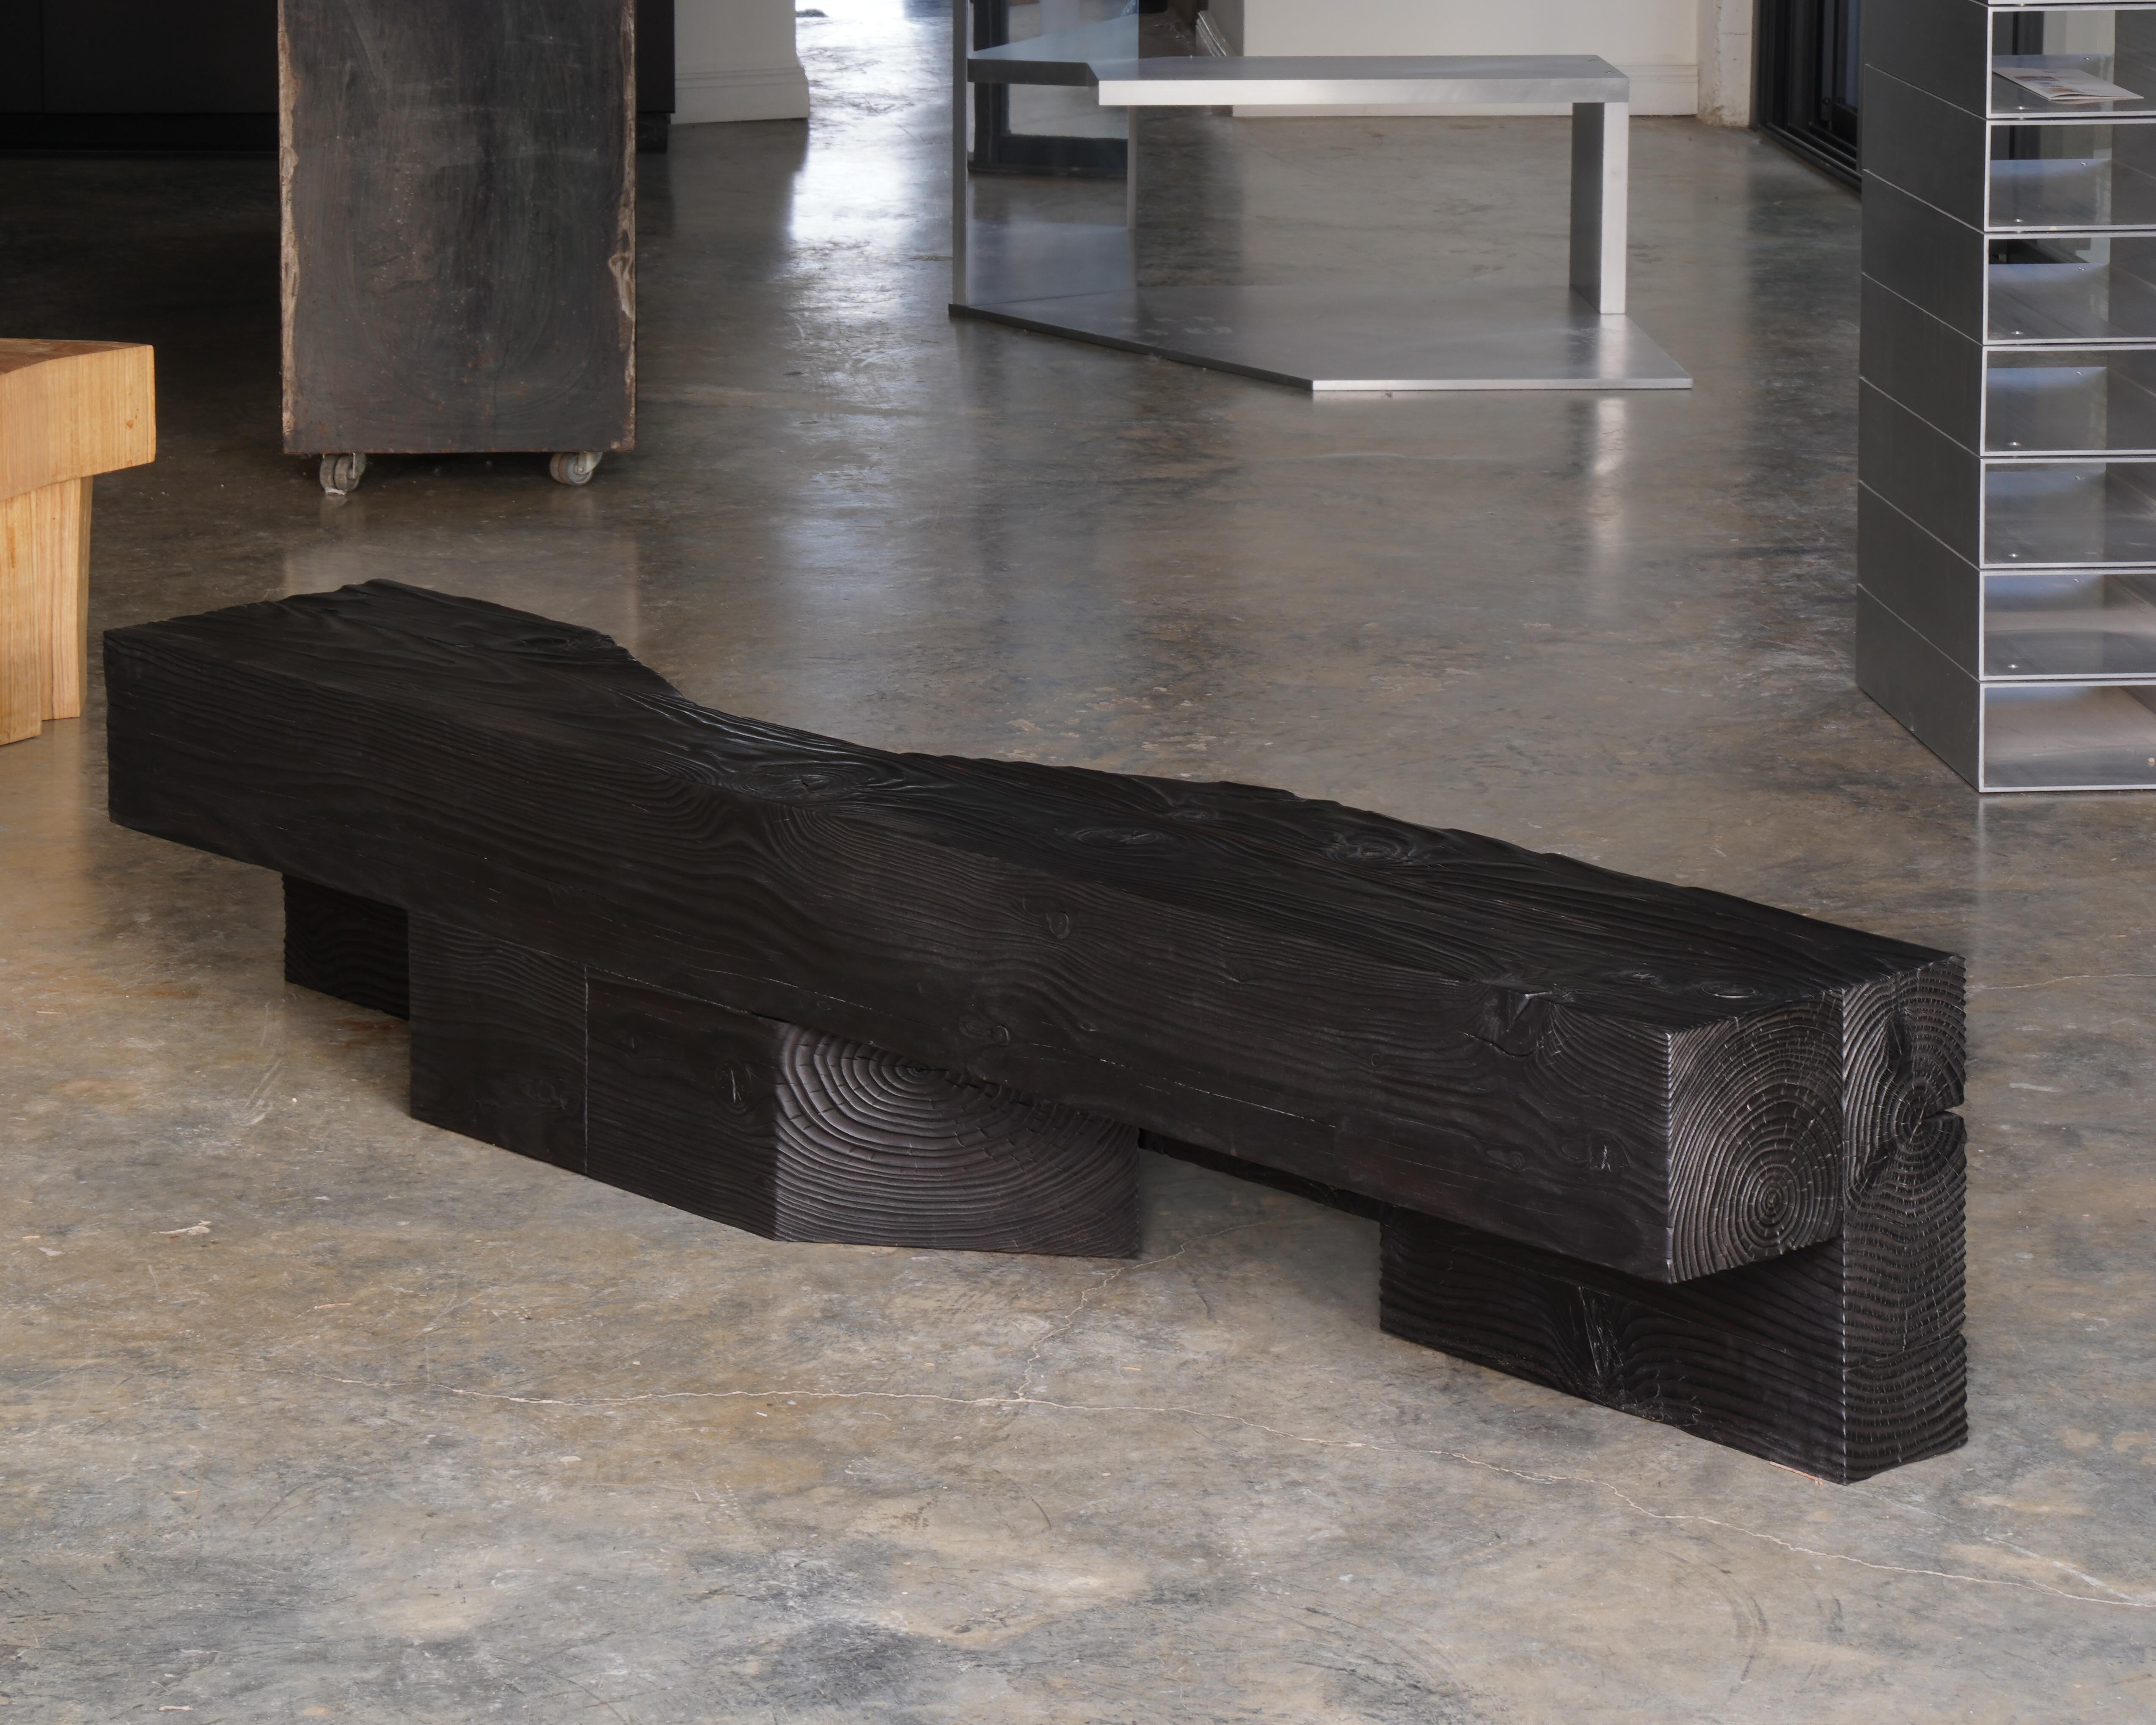 The Slide series is inspired by both the brutalist and geometric form of urban furniture typologies. This piece, designed by the duo Heim+Viladrich, consists of a bench crafted from burnt, brushed, and waxed Douglas fir. This surface treatment